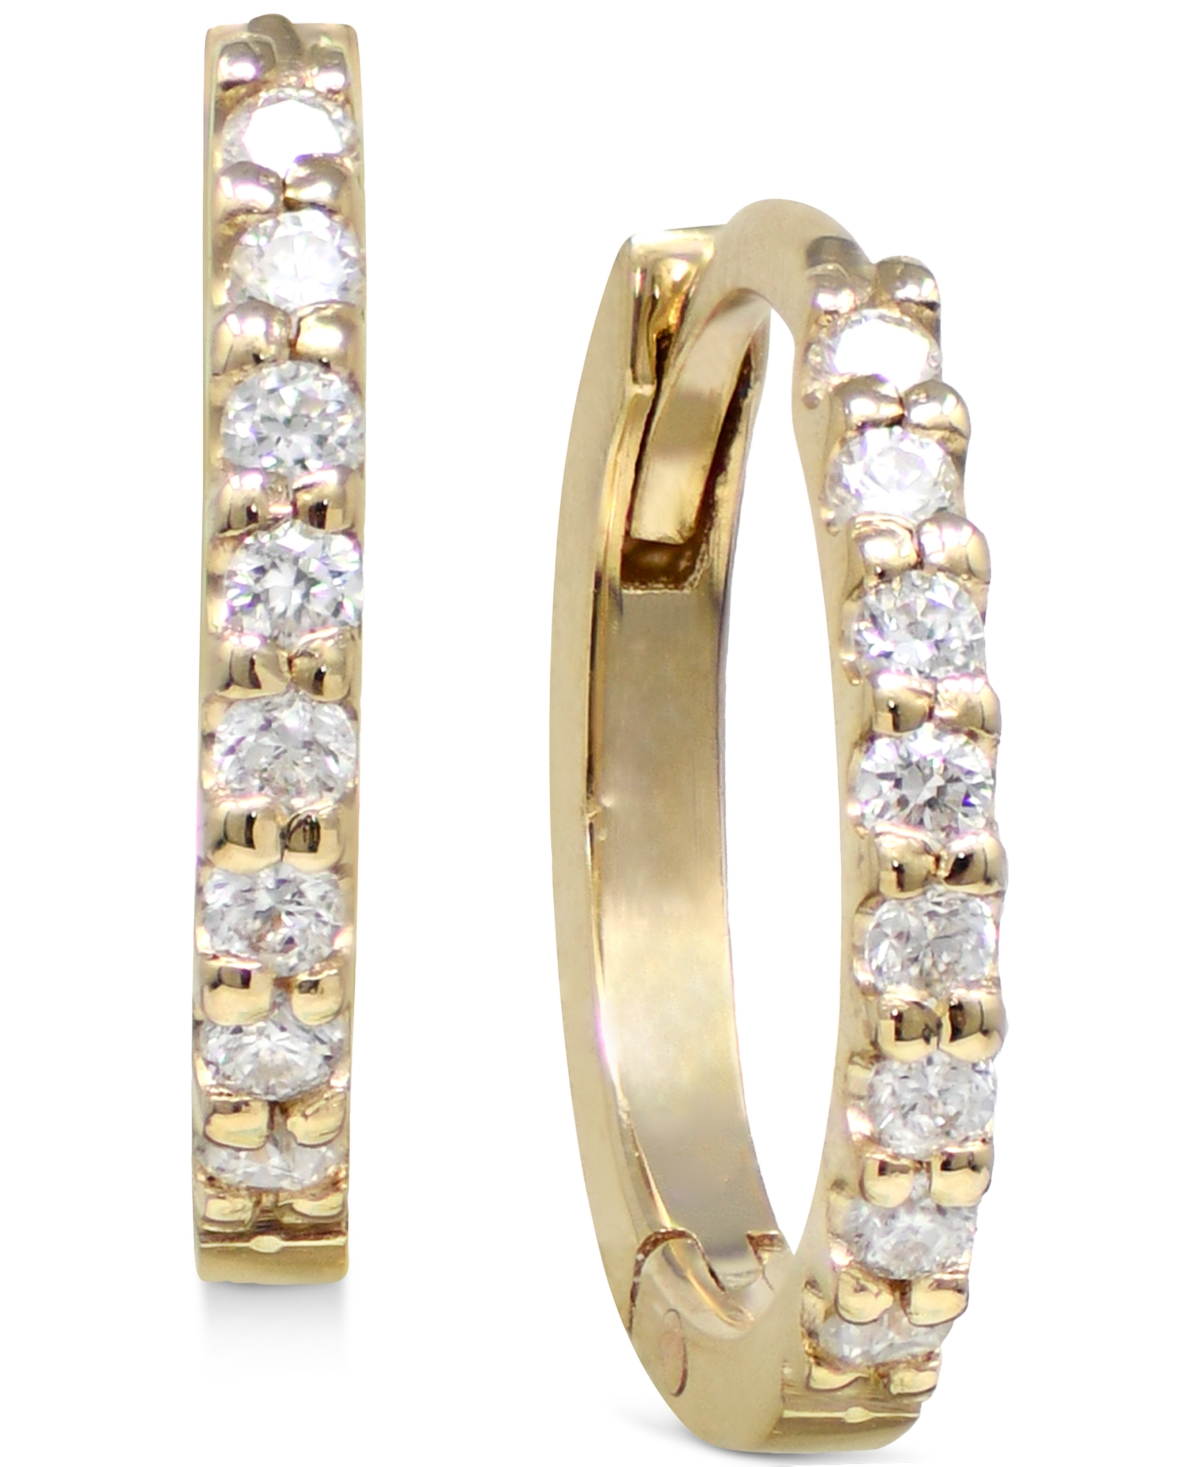 Diamond Pave Extra Small Hoop Earrings (1/8 ct. t.w.) in 14k Gold, 0.47" - Gold